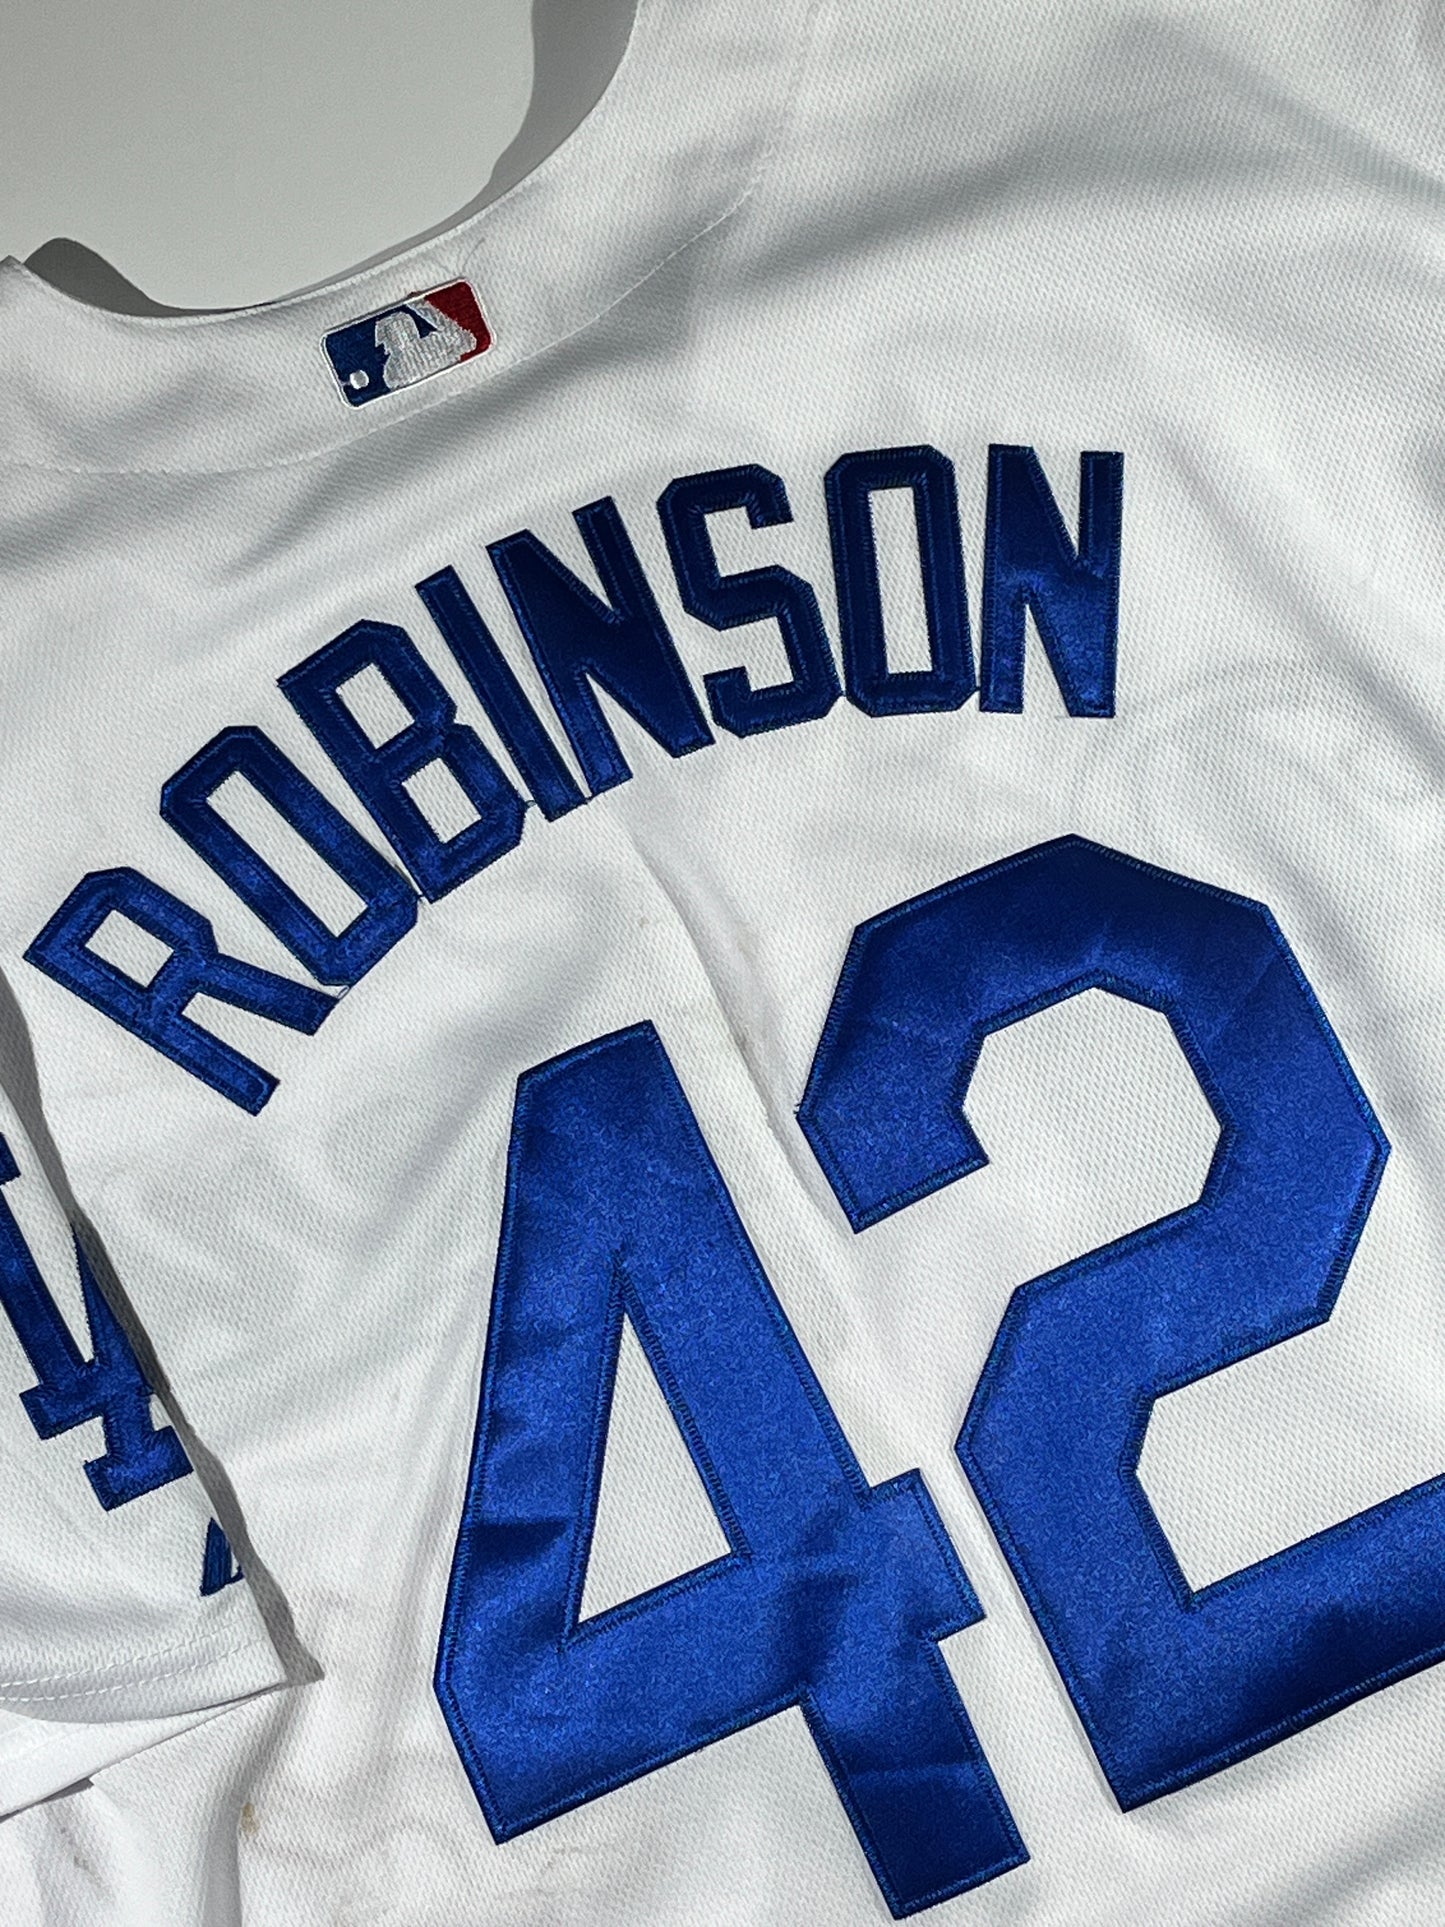 Vintage Los Angeles Dogers Jersey MLB Jackie Robinson *As Is*